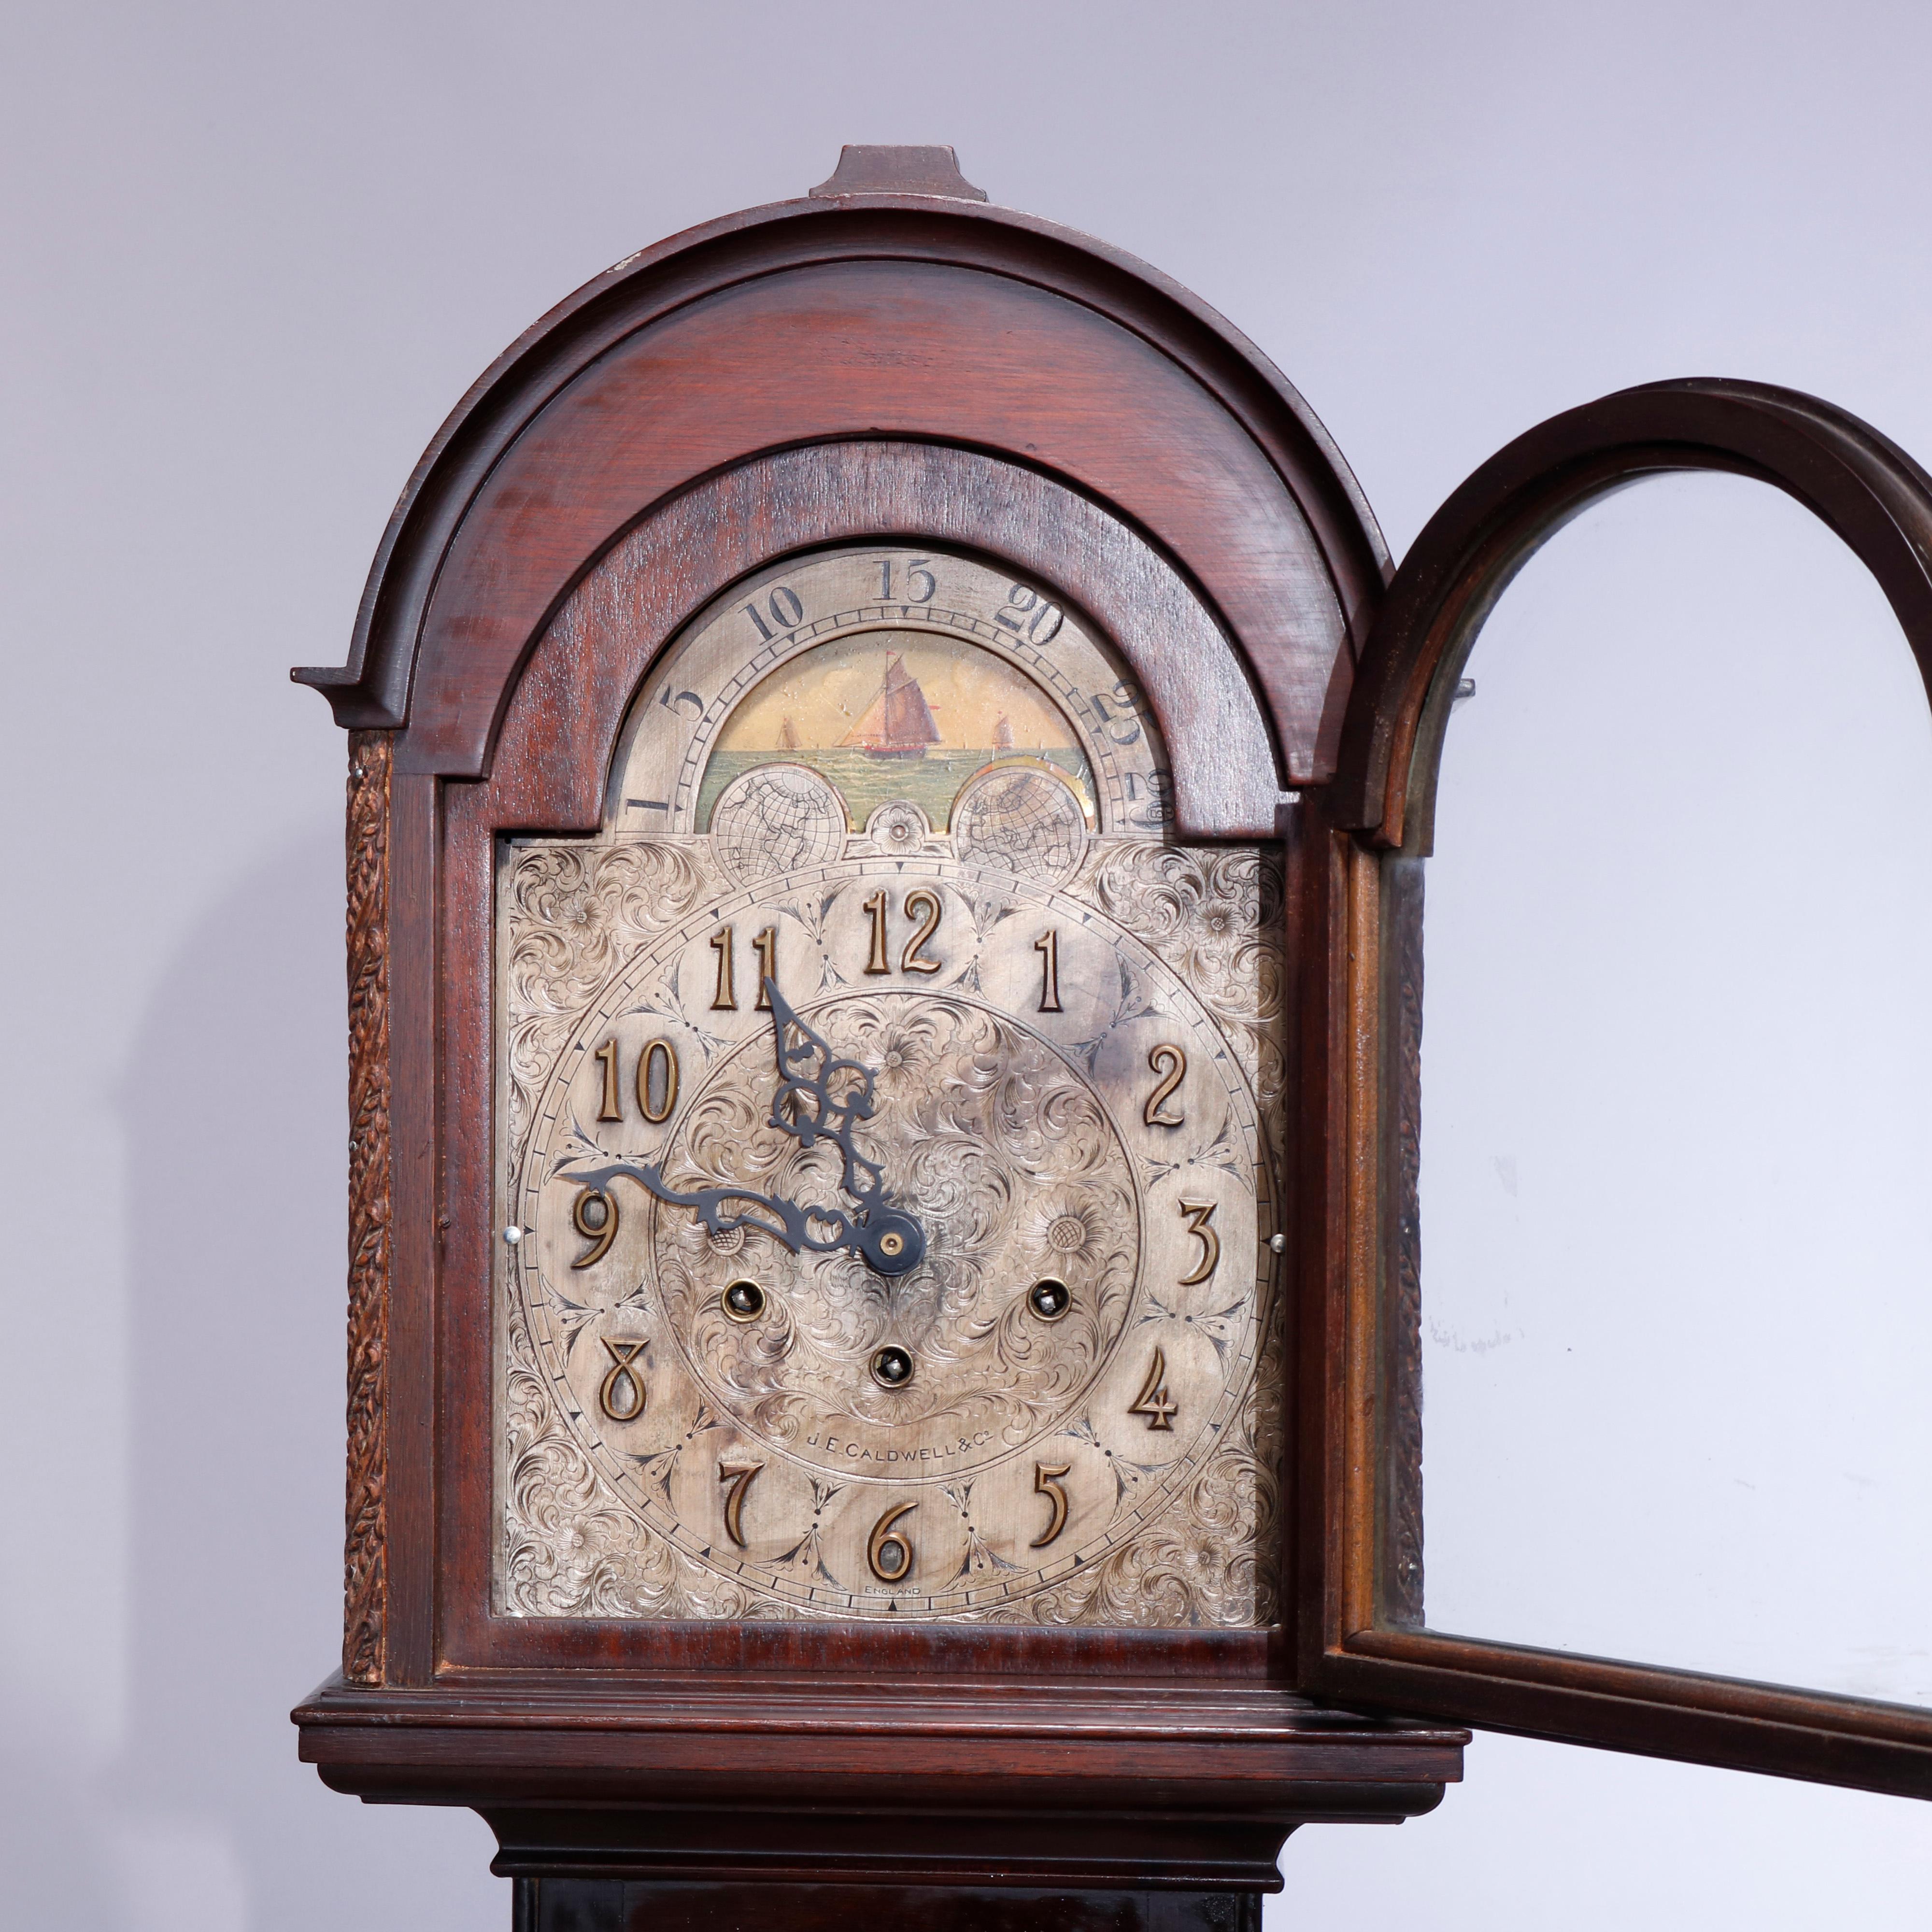 An antique grandmother's clock by J.E. Caldwell & Co. offers diminutive form with mahogany case with domed hood having moon phase dial over face with foliate cast filigree decoration, door with fleur de lis mount, signed on face as photographed,